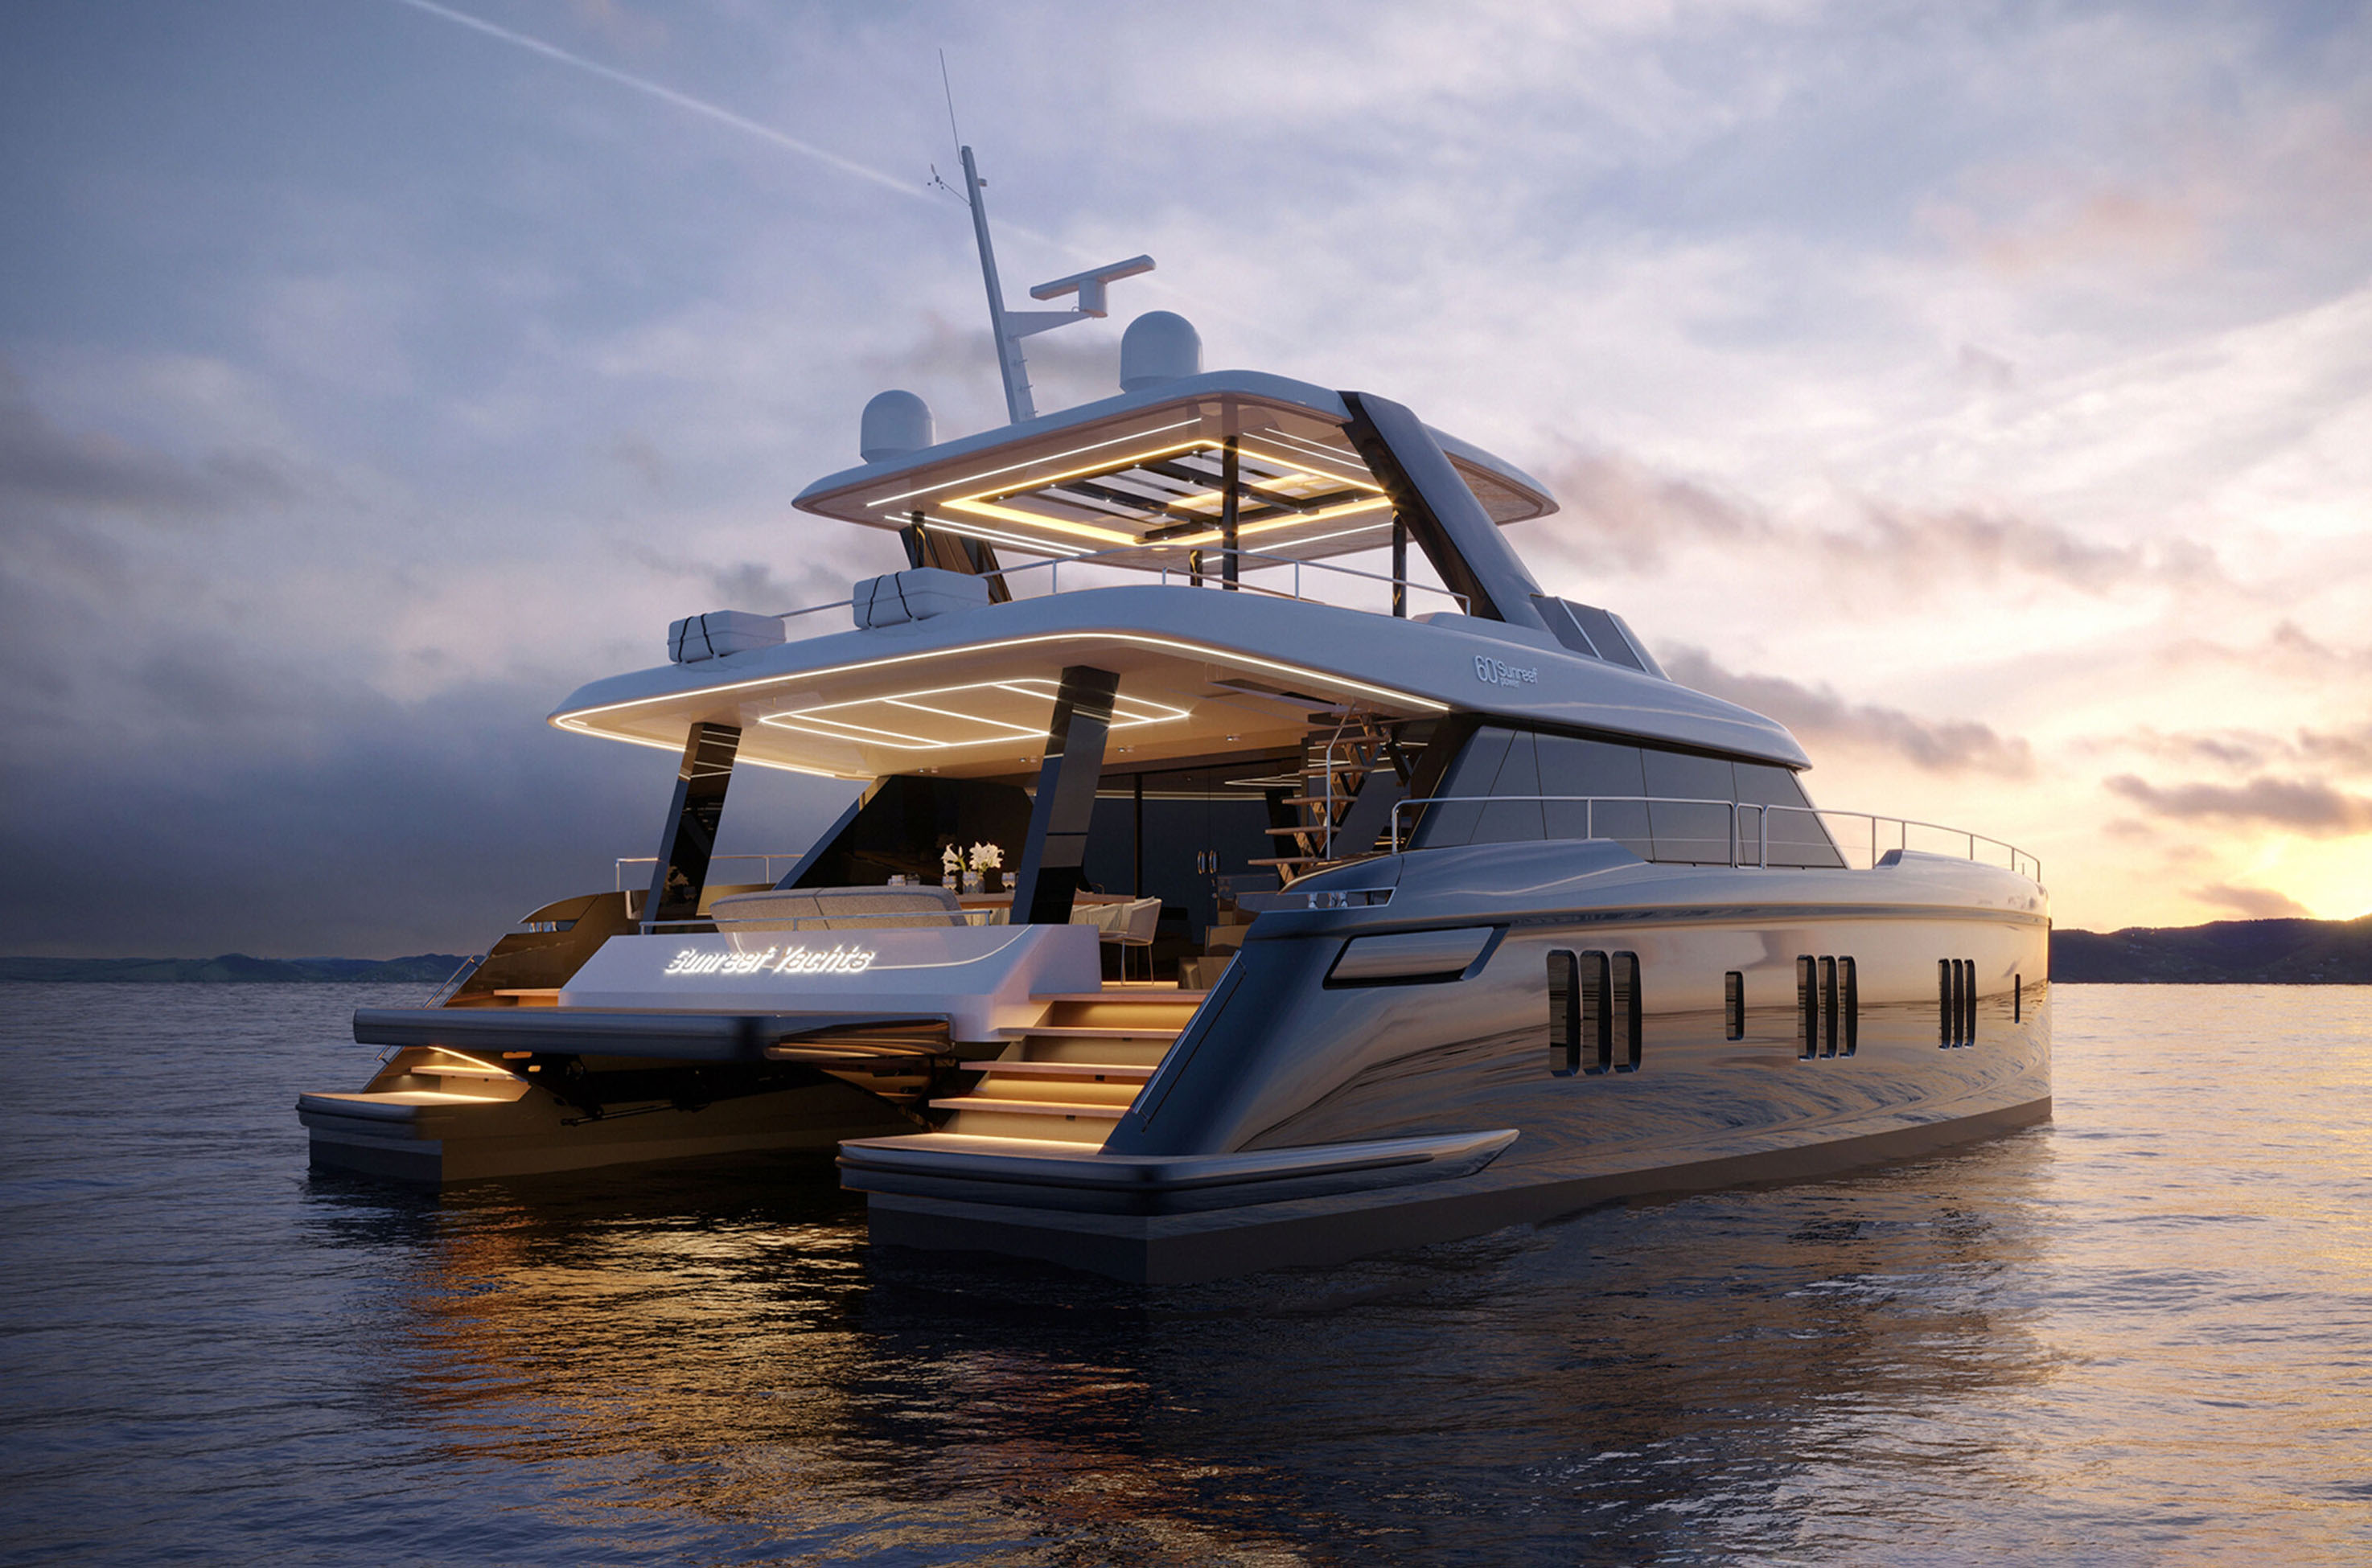 render of the yacht on the water